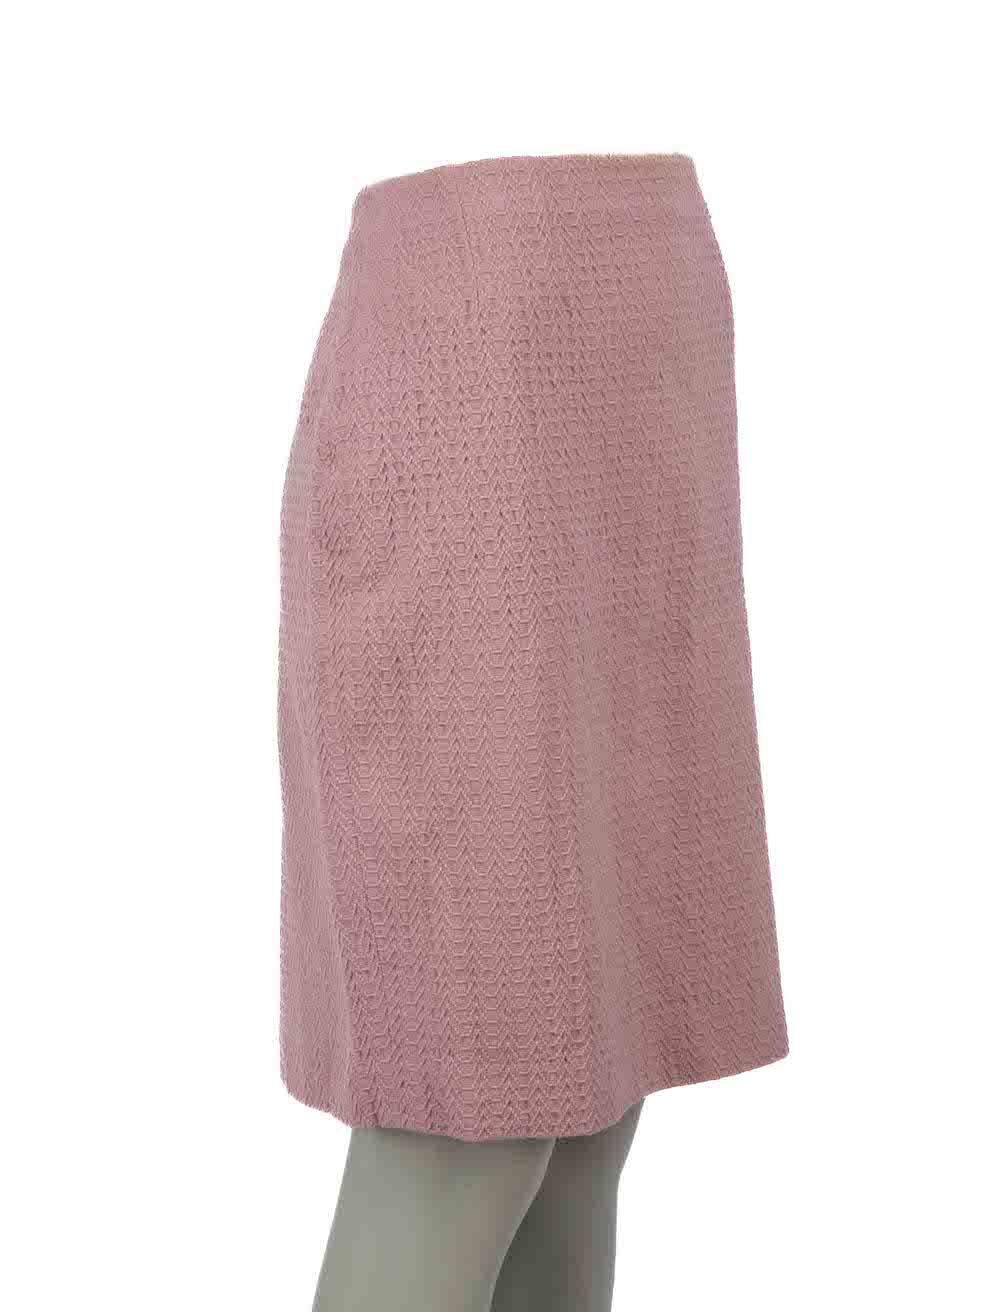 CONDITION is Very good. Minimal wear to skirt is evident. Minimal wear to back of lining where stains is evident and the lining seam is partially unstitched on this used Dior designer resale item.
 
Details
Pink
Wool
Pencil skirt
Knee length
Back